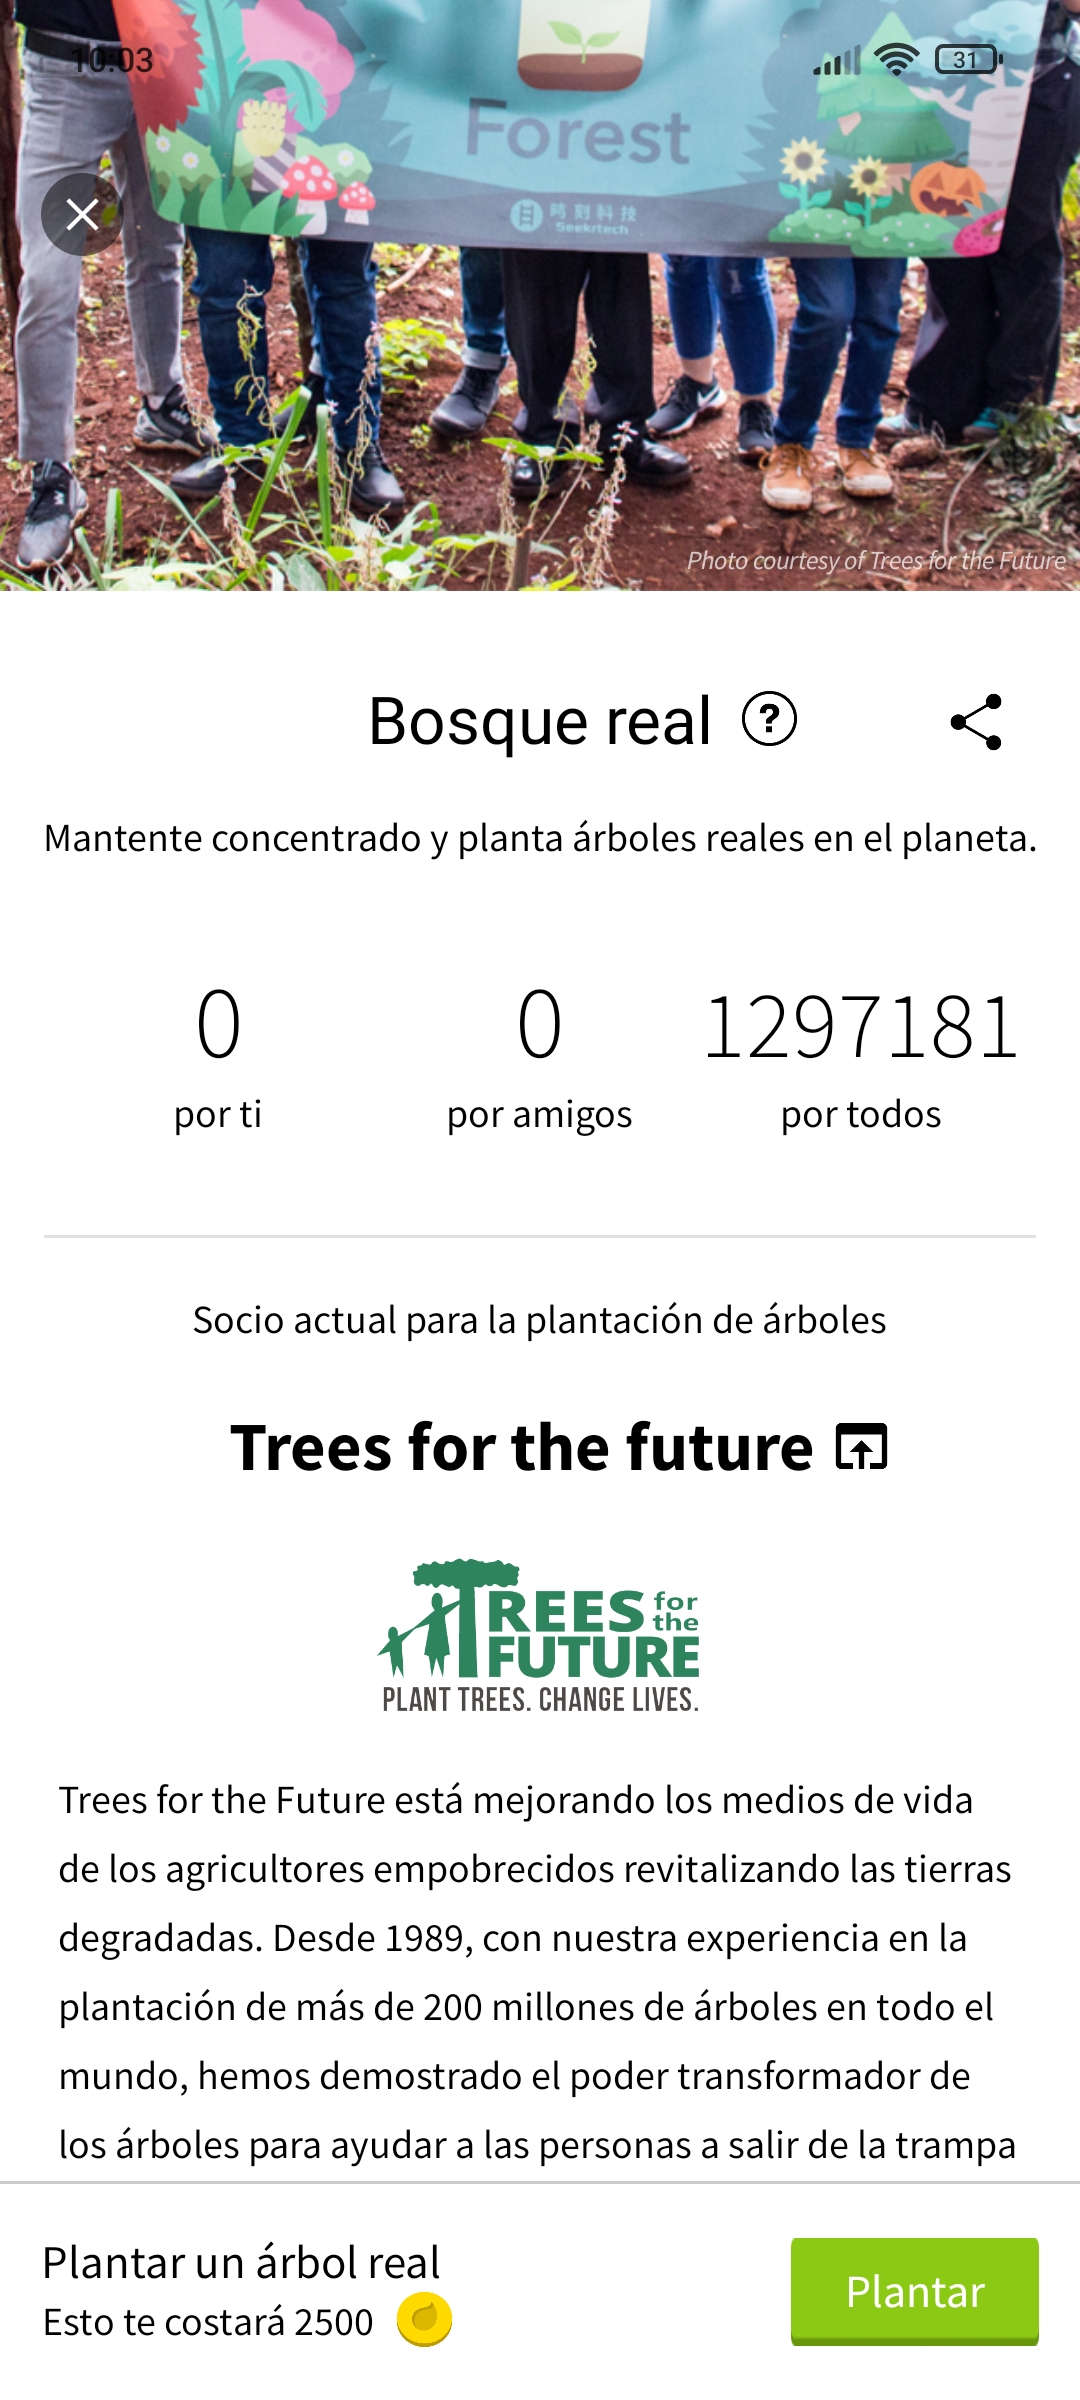 Image showing the real forest section where we can plant a real tree in exchange for virtual coins. In addition, there is also a brief explanation of the agreement with the organization Trees for the Future.